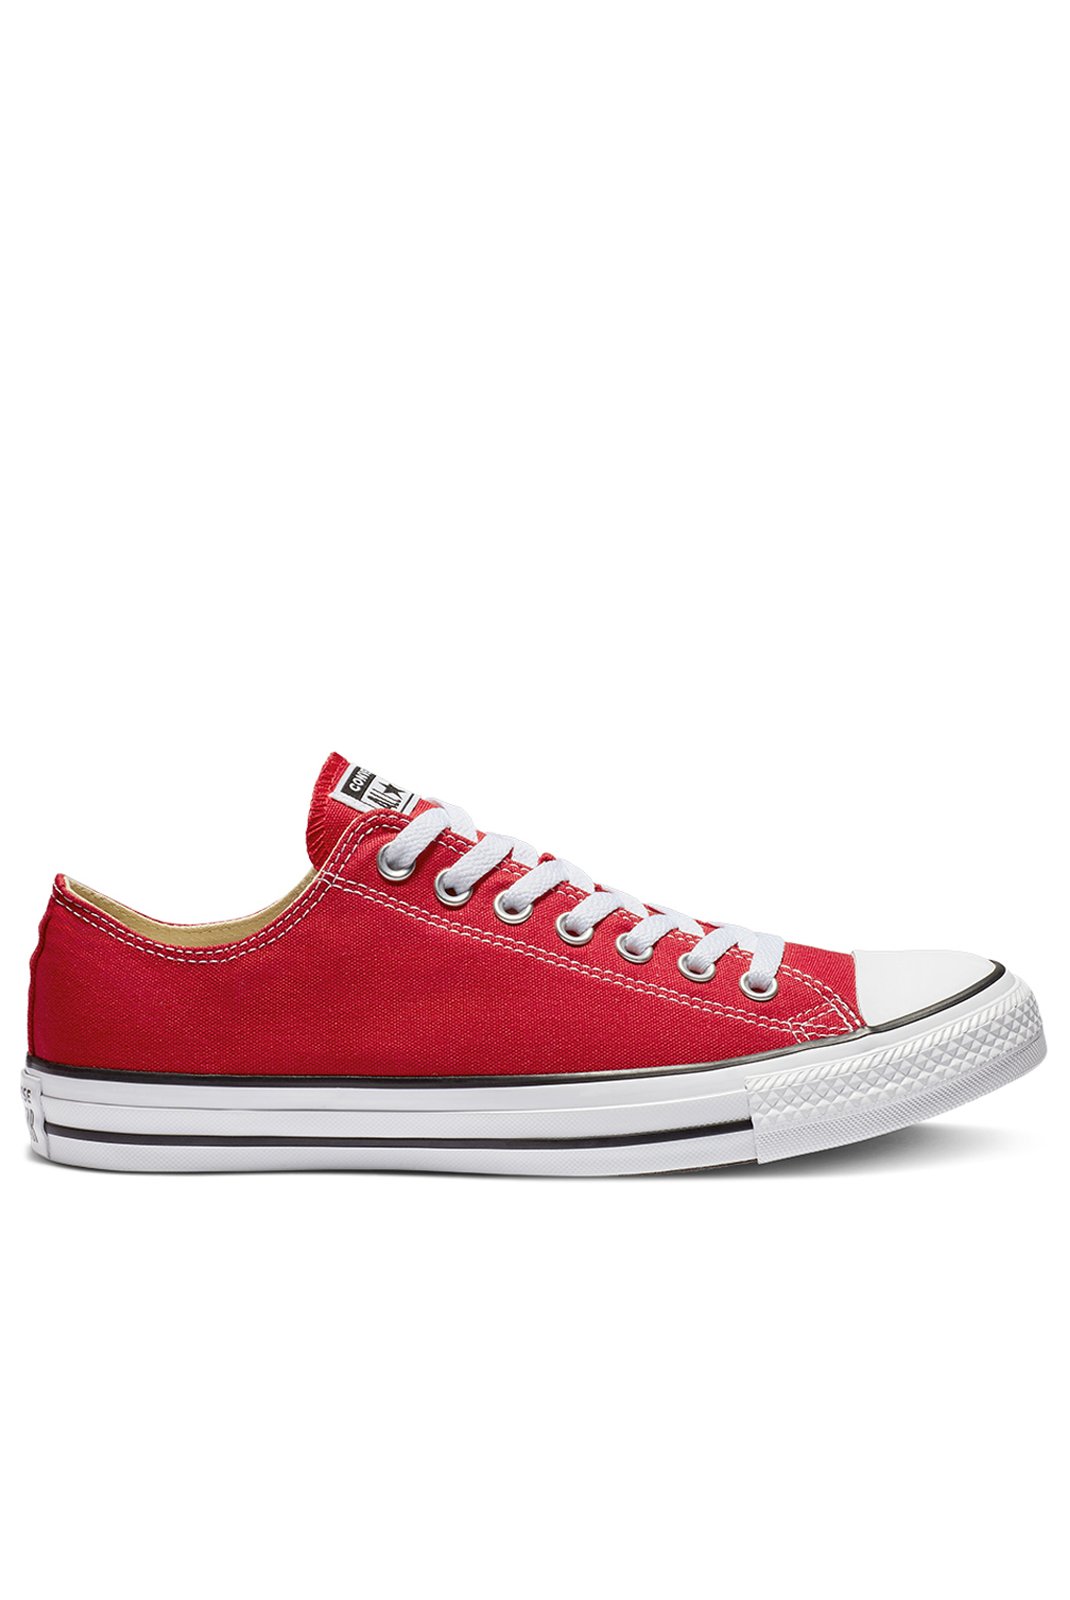 Chaussures   Converse M9696 Red